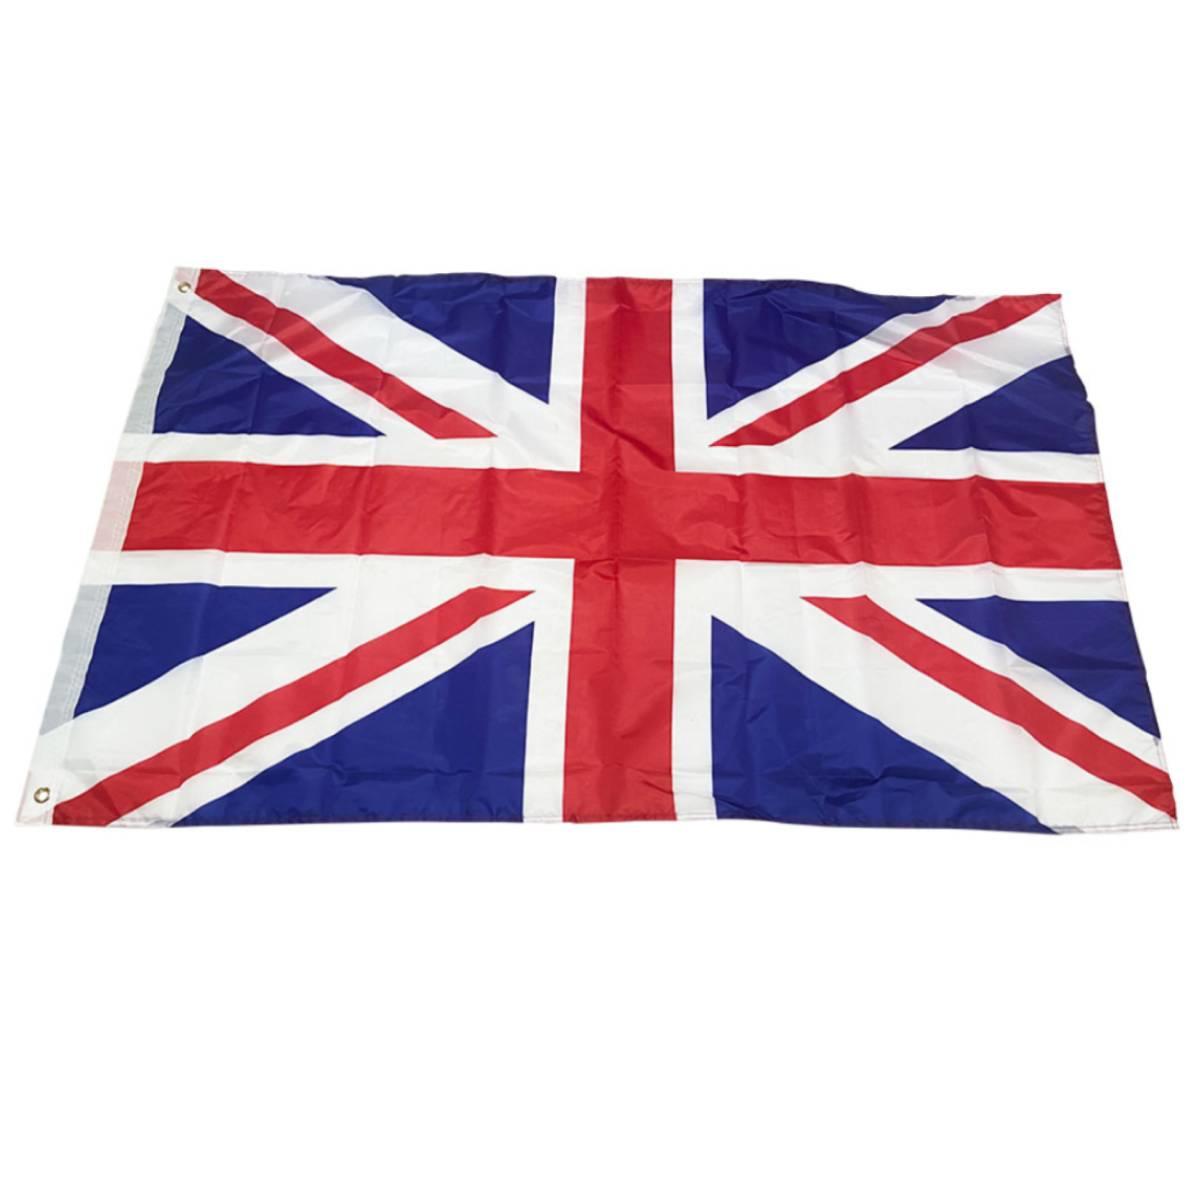 Polyester Union Jack Flag 5ft x 3ft with Eyelets by Wicked AC-9440 available here at Karnival Costumes online party shop